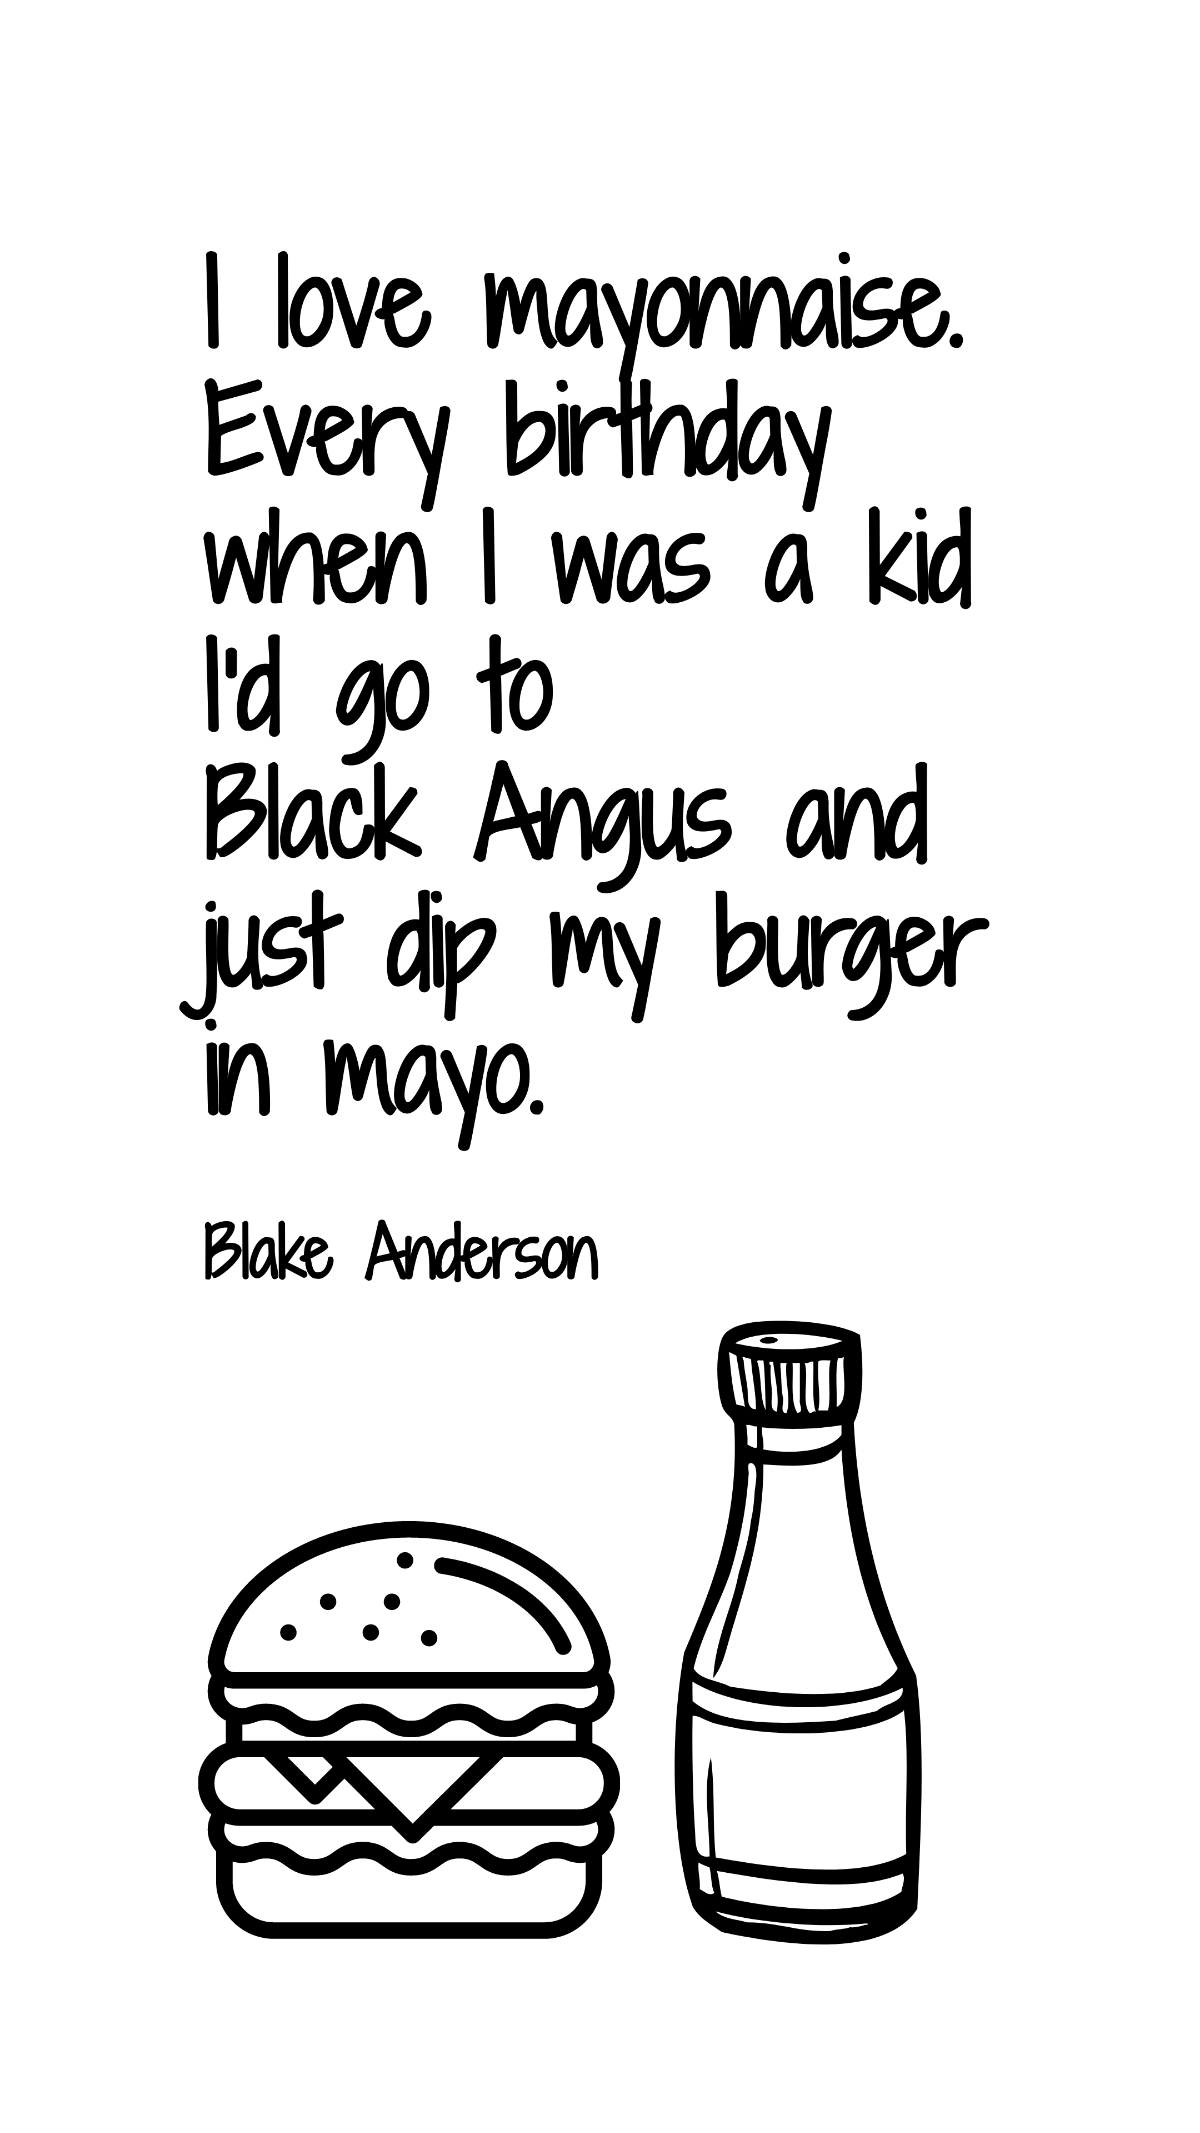 Blake Anderson - I love mayonnaise. Every birthday when I was a kid I'd go to Black Angus and just dip my burger in mayo. Template